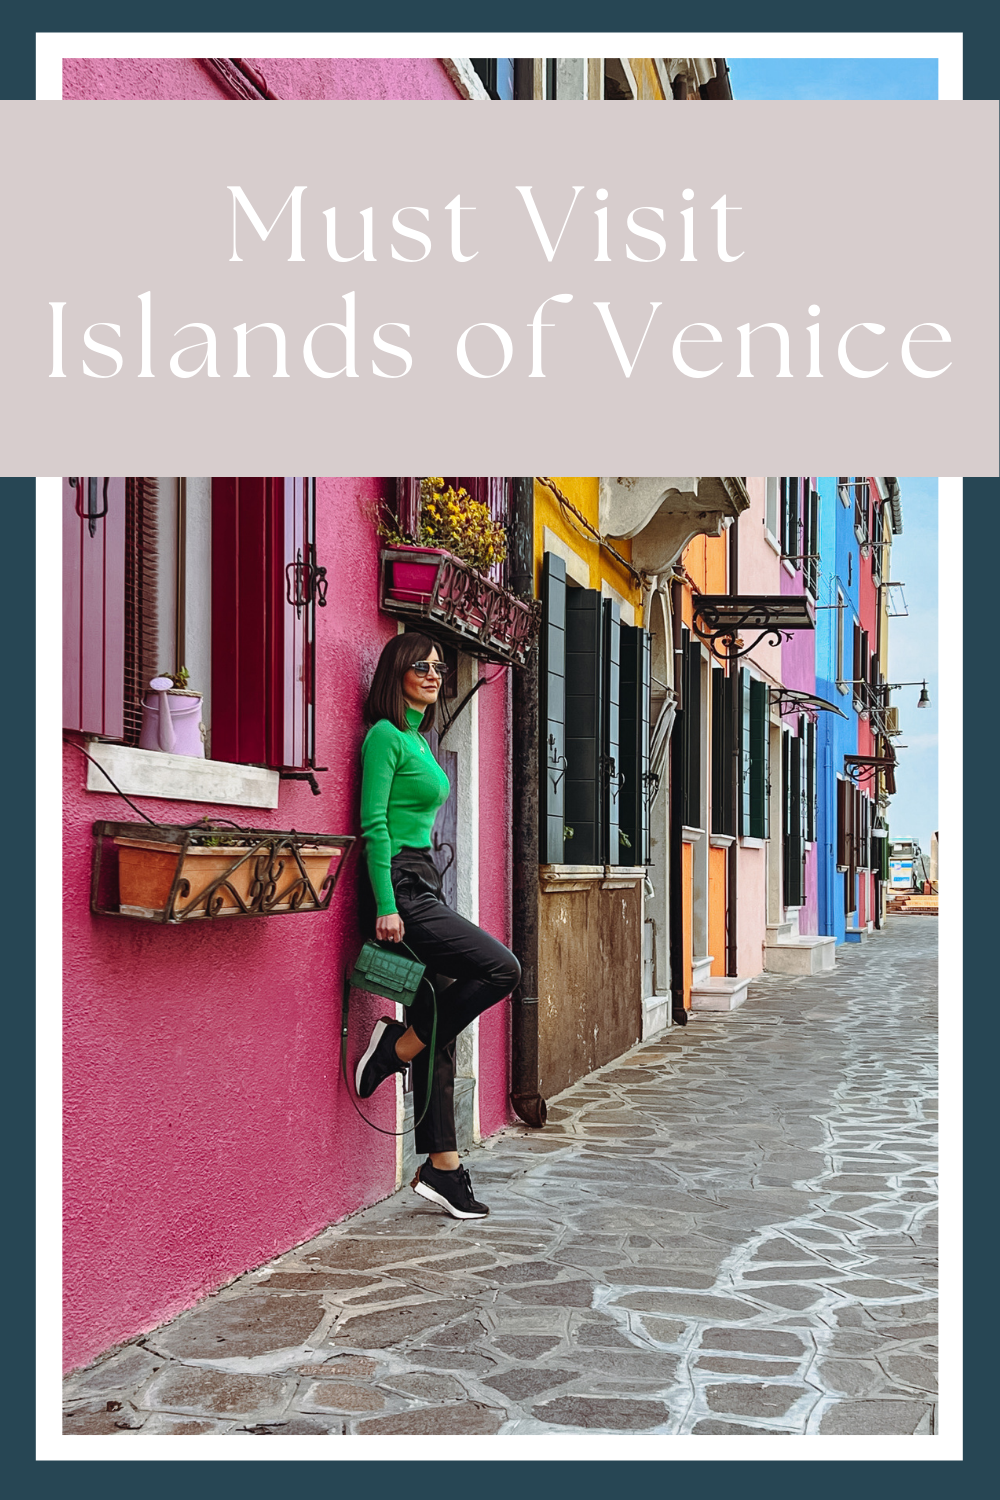 Islands of Venice by My Next Pin